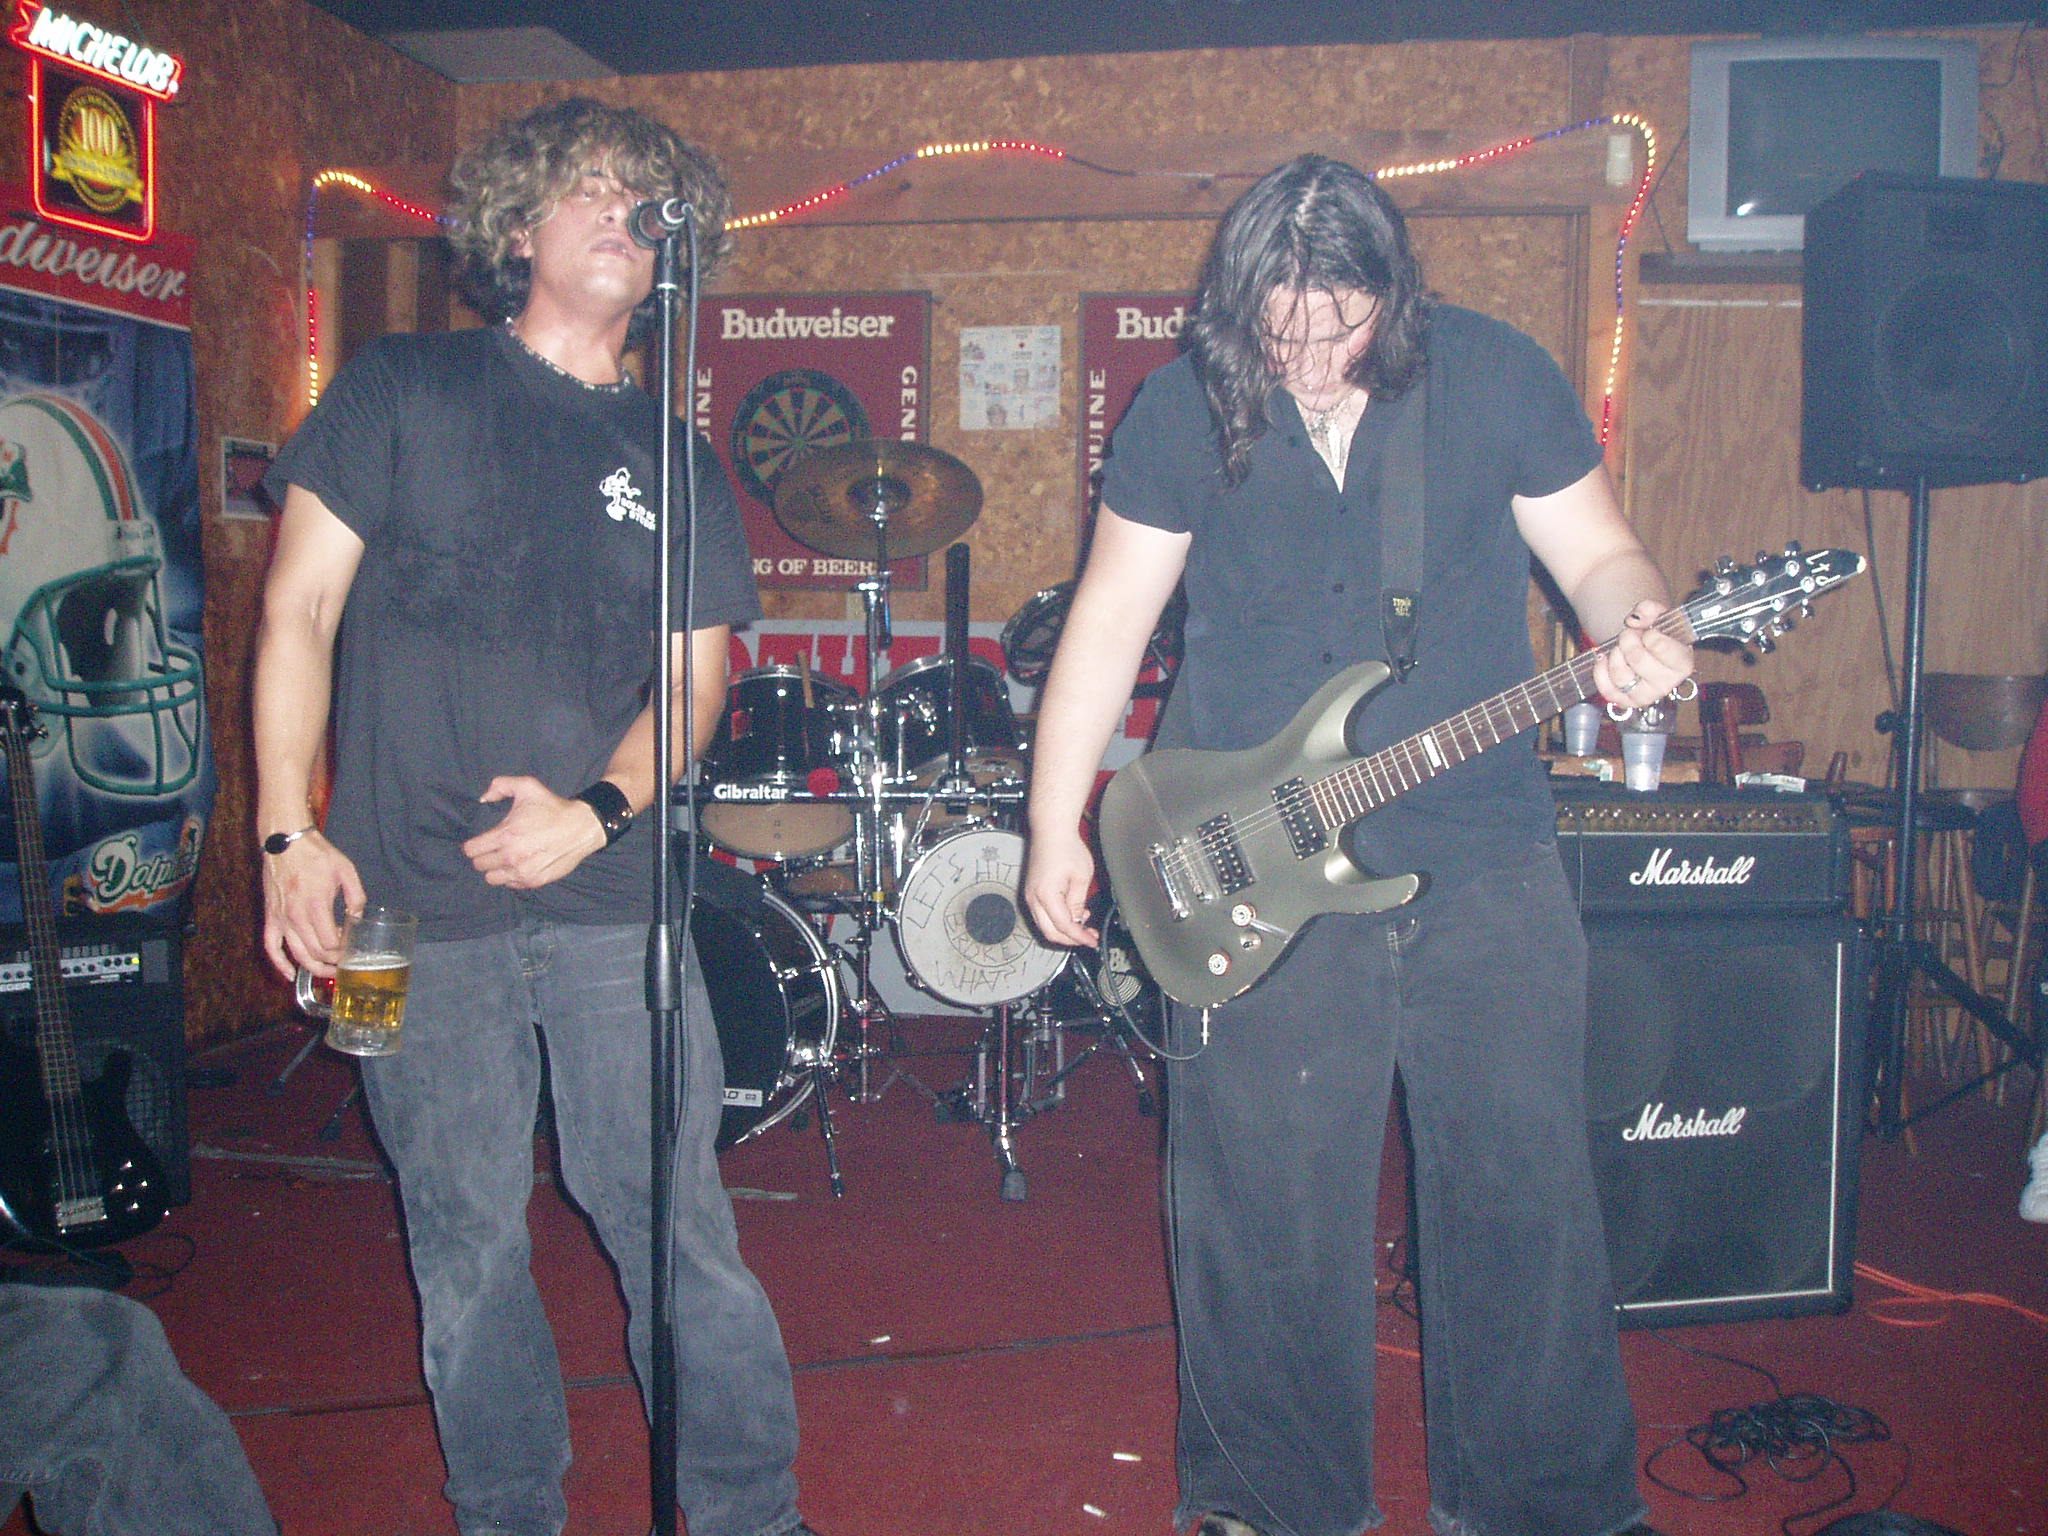 Osiris Rising performing at Mothers Pub Margate, FL - August 2003 - Michael Ibarra and Joe Arthur pictured - Photo by Sarah Dewey